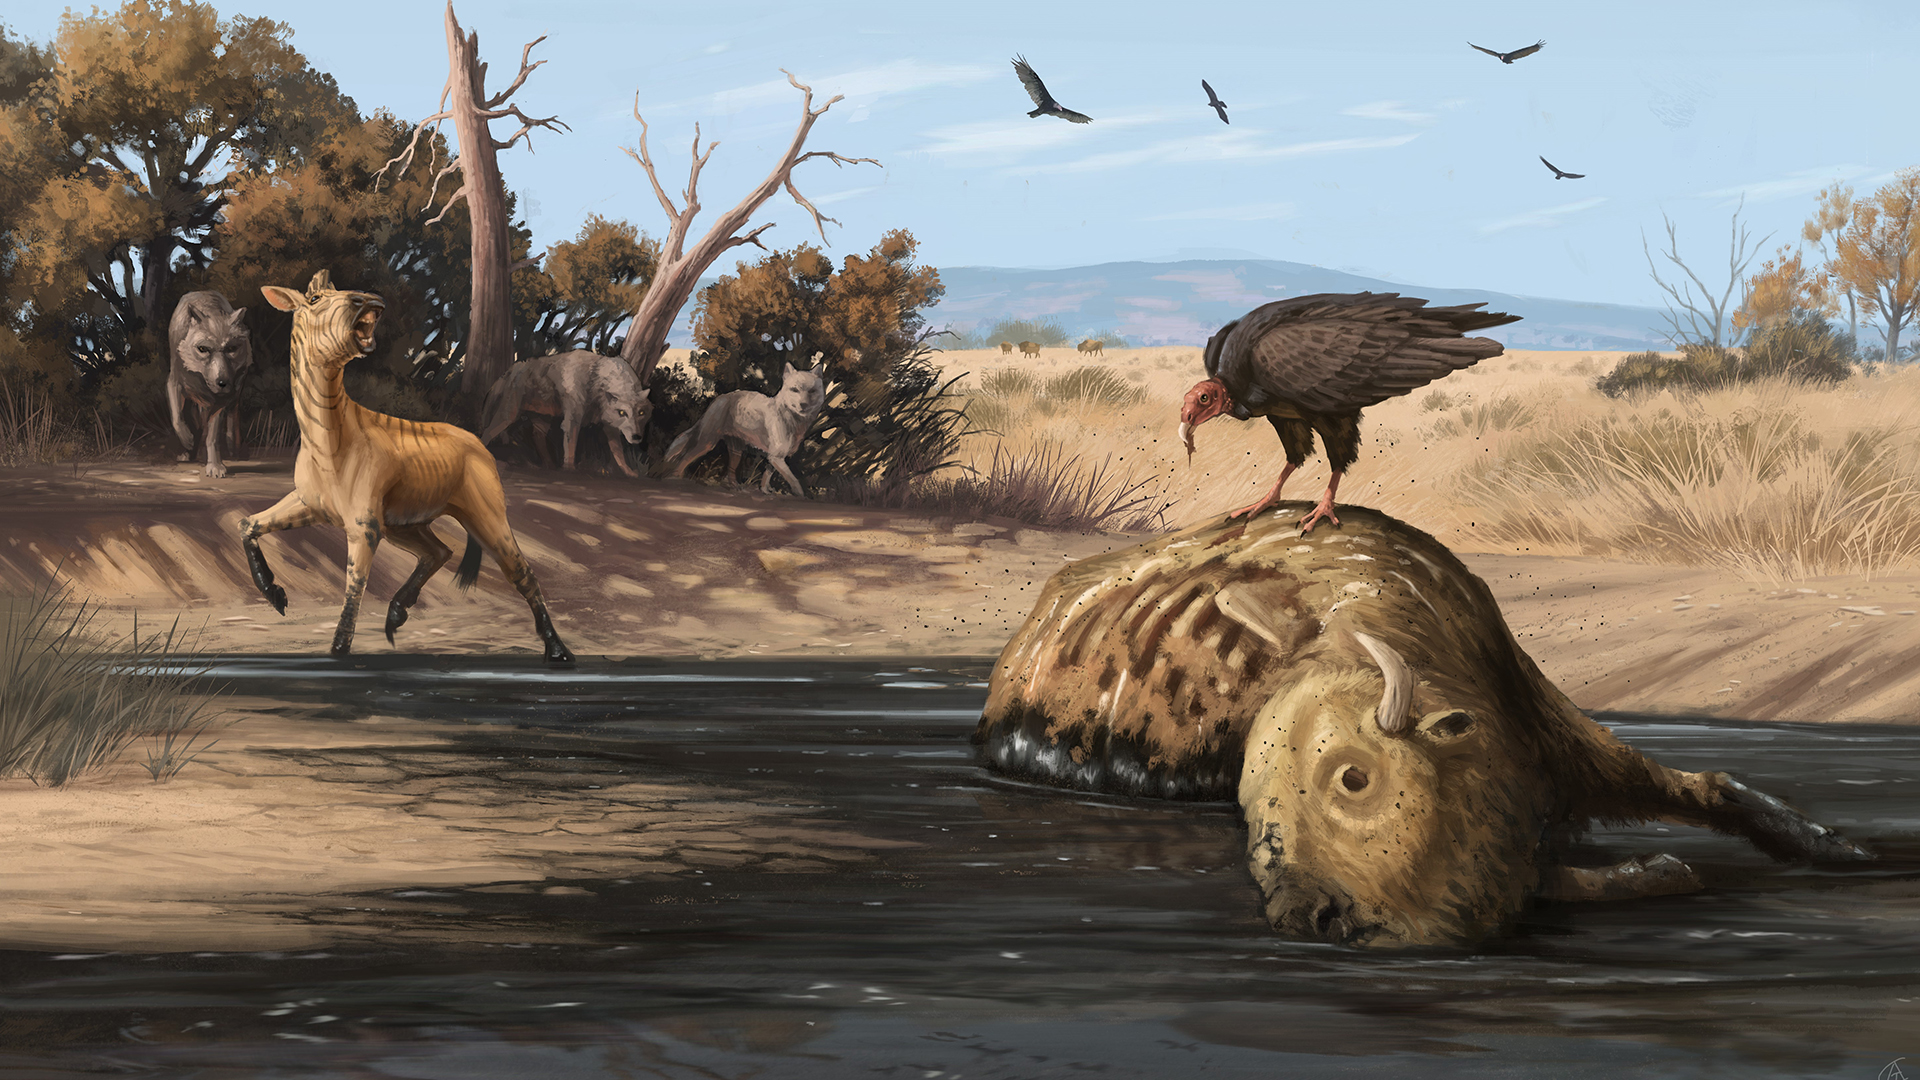 Illustration of dire wolves closing in on Western horse and bison decomposing in asphalt.